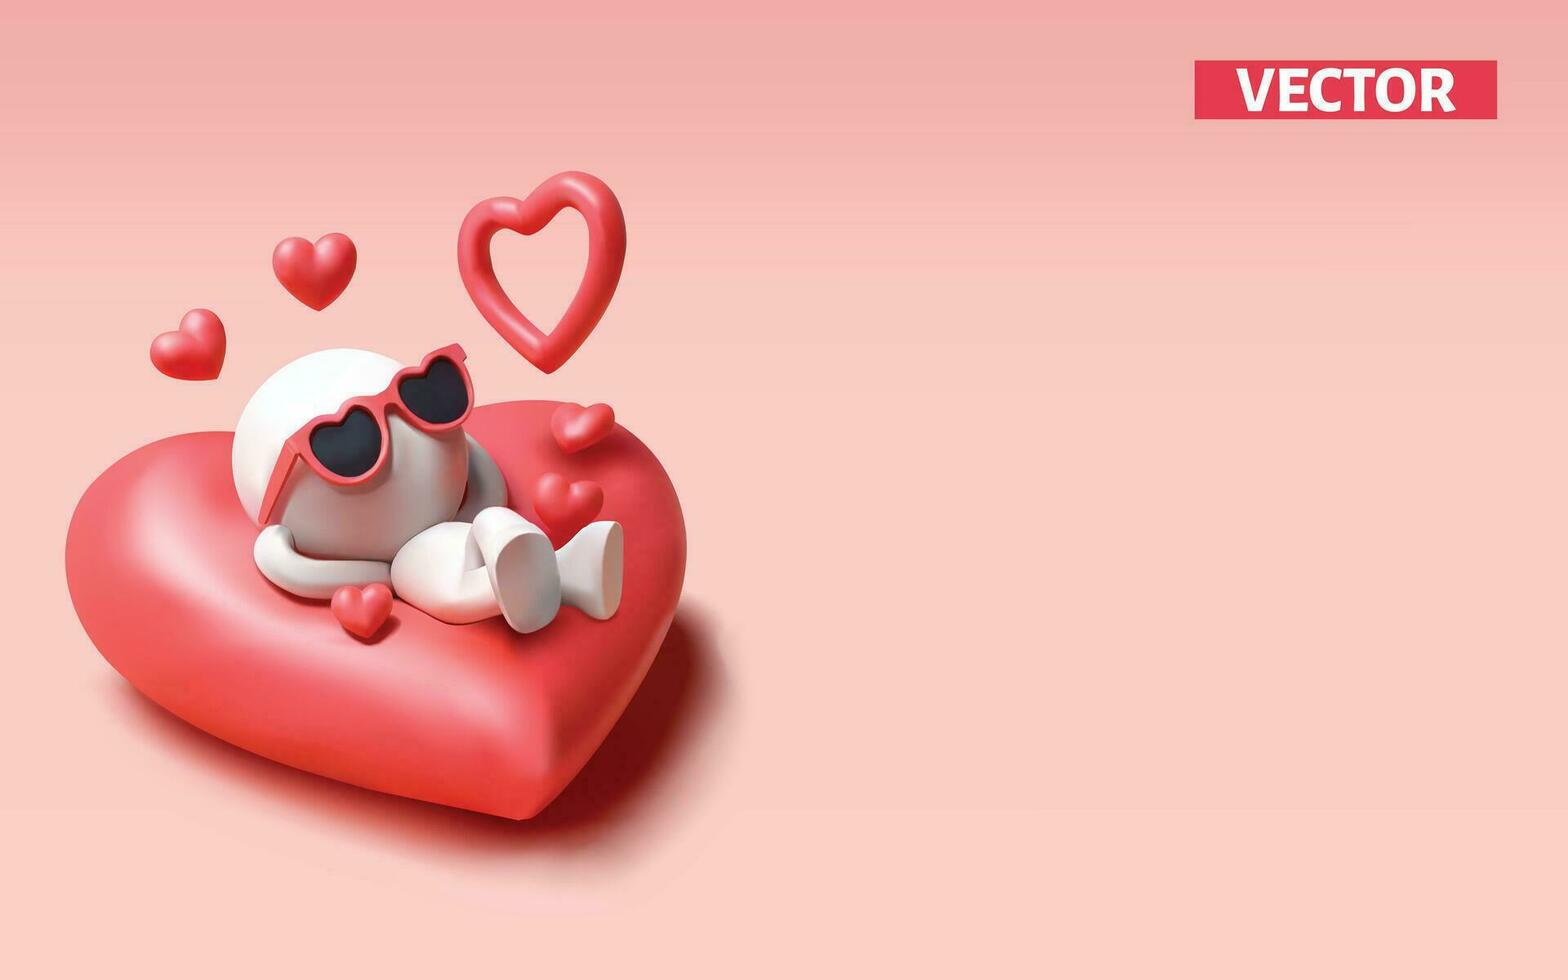 Love concept character falling in love smilling on Heart Sleeping cushion 3D vector on light pink background.